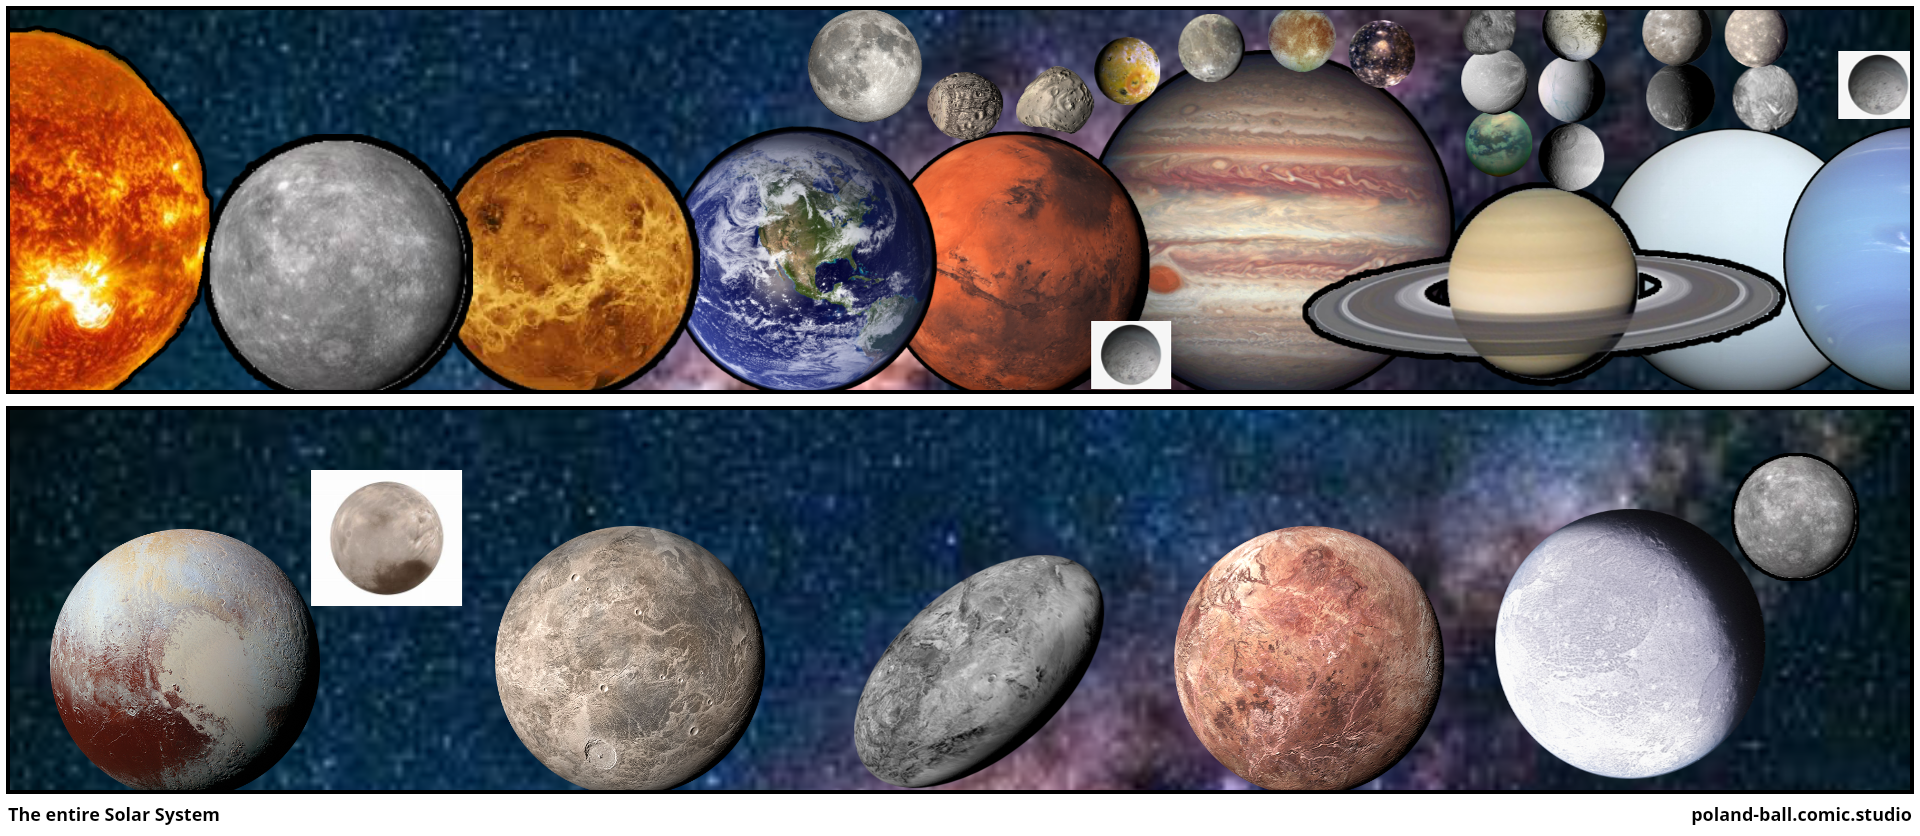 The entire Solar System